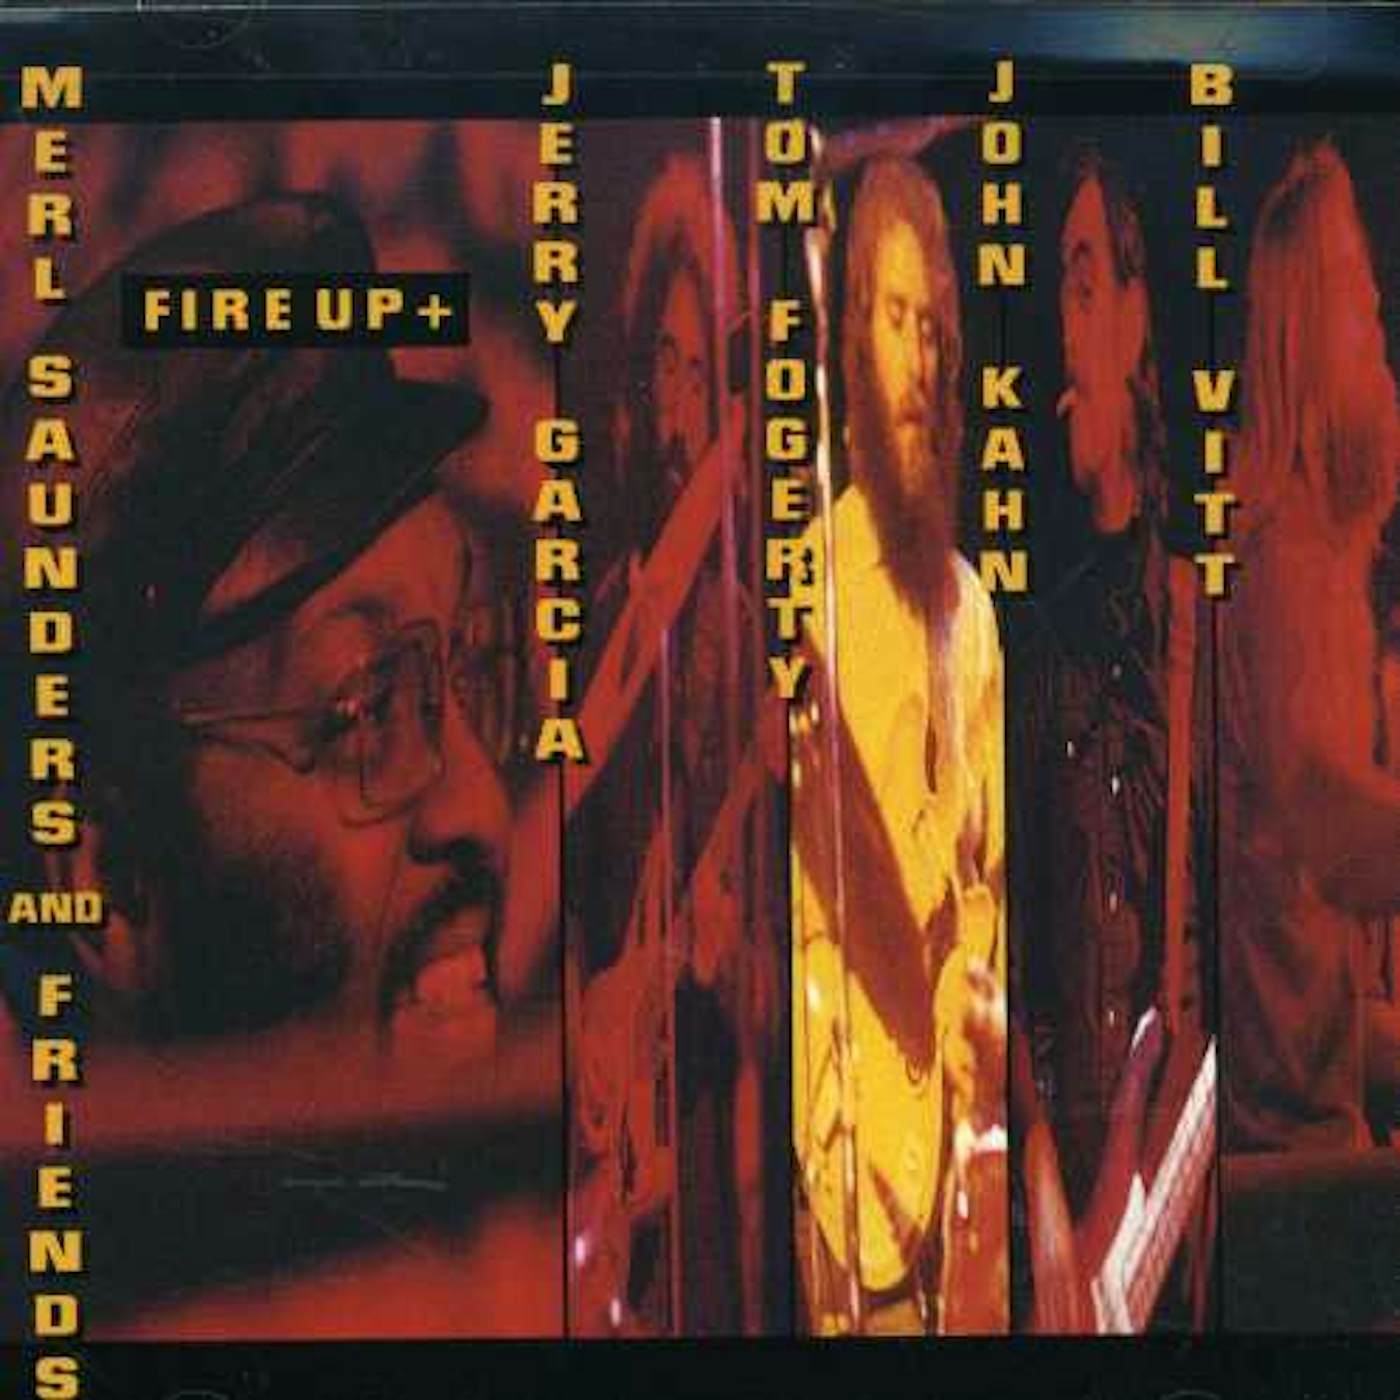 Merl Saunders FIRE UP PLUS CD